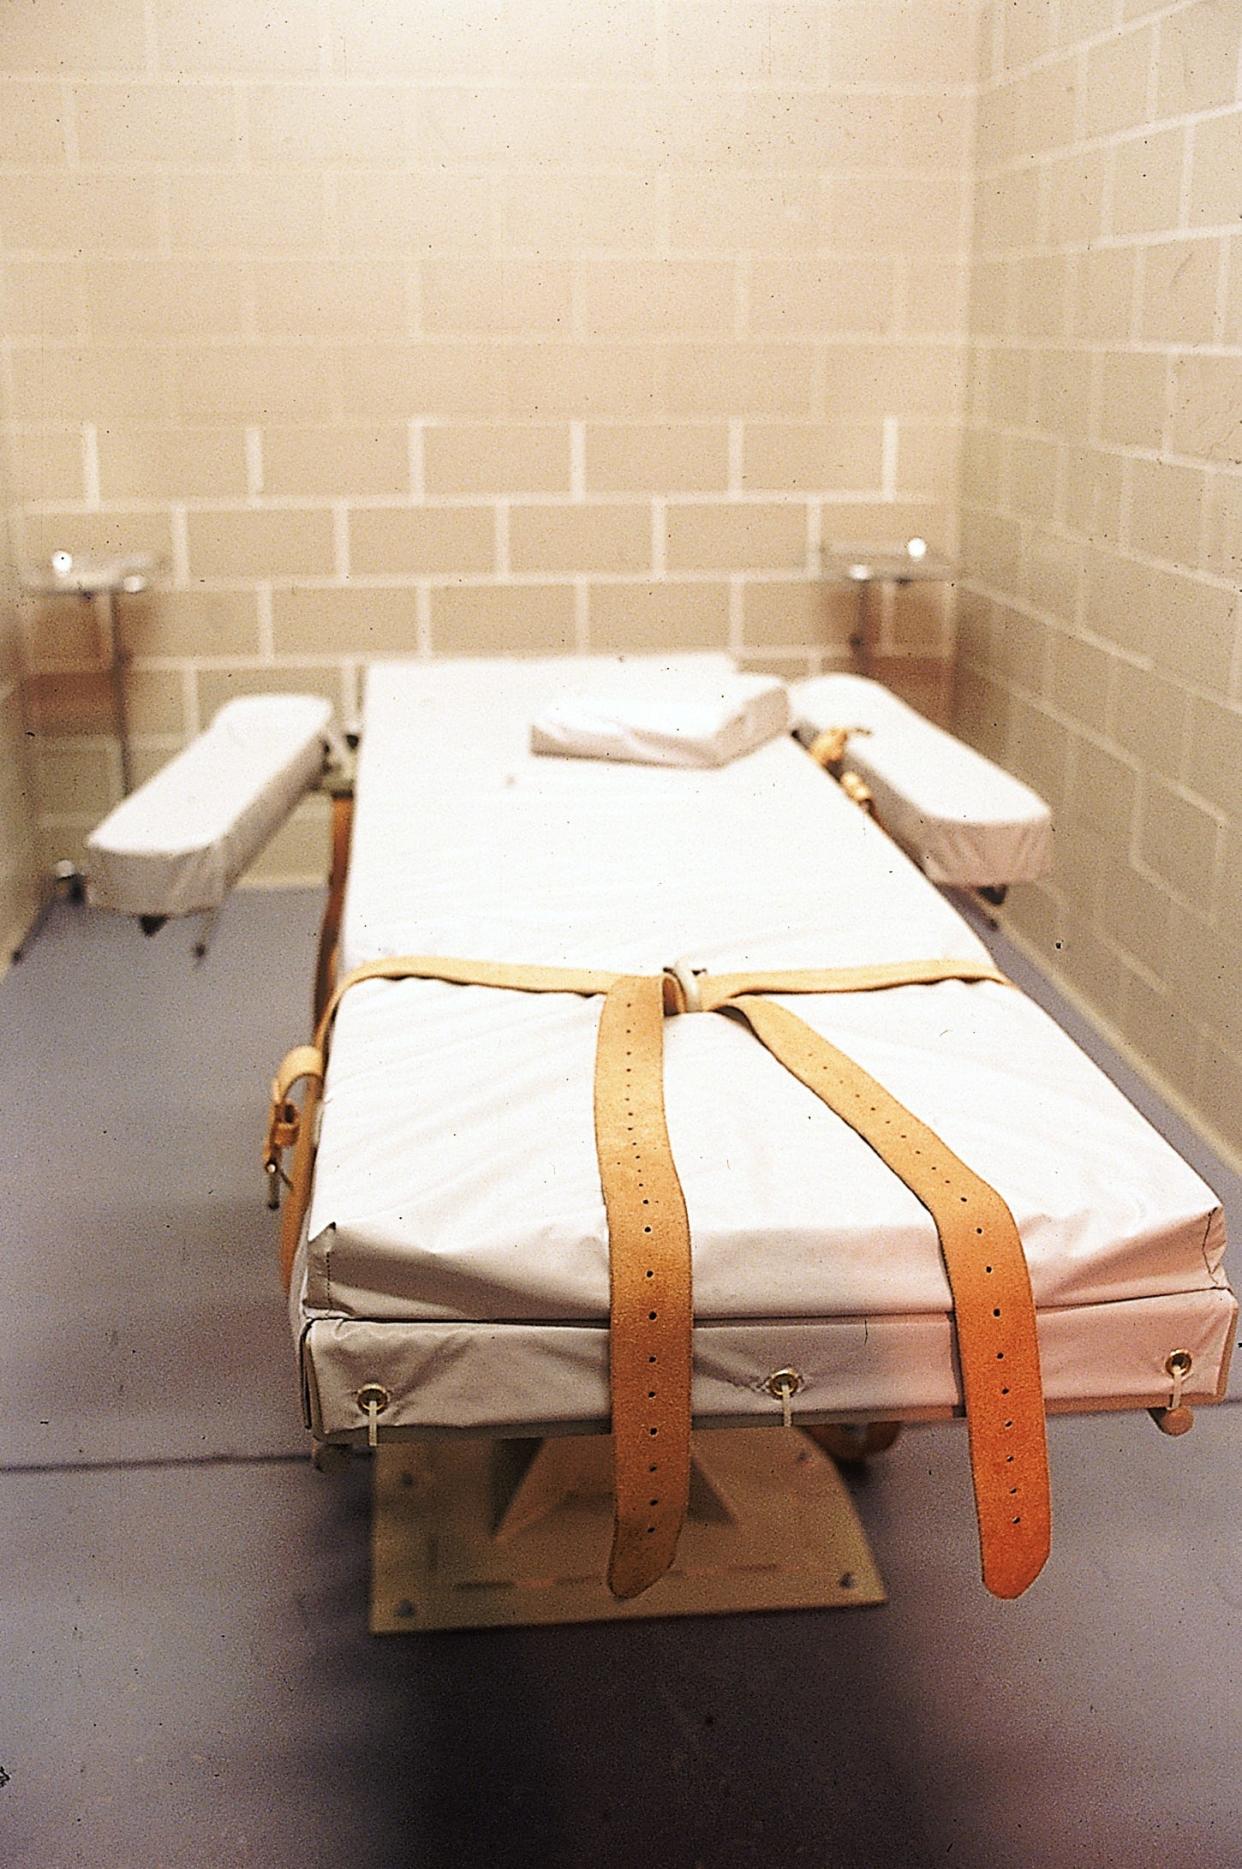 Being pro-life and believing in the death penalty is possible